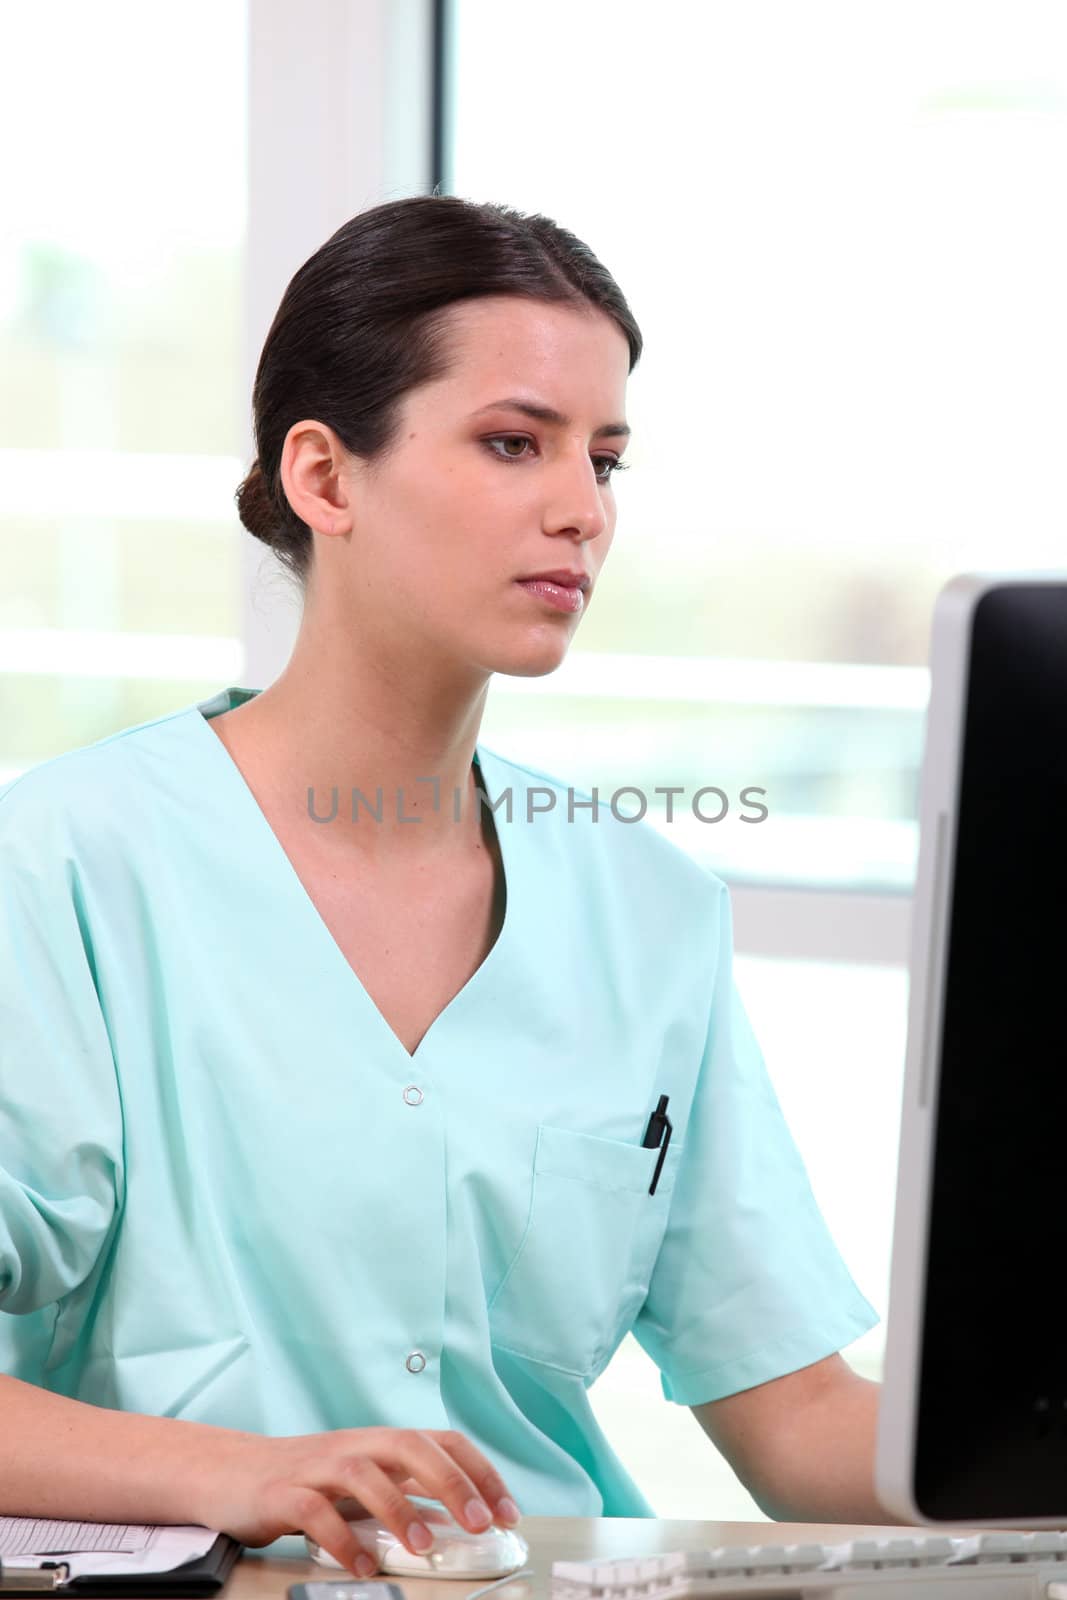 Nurse sitting at a computer by phovoir